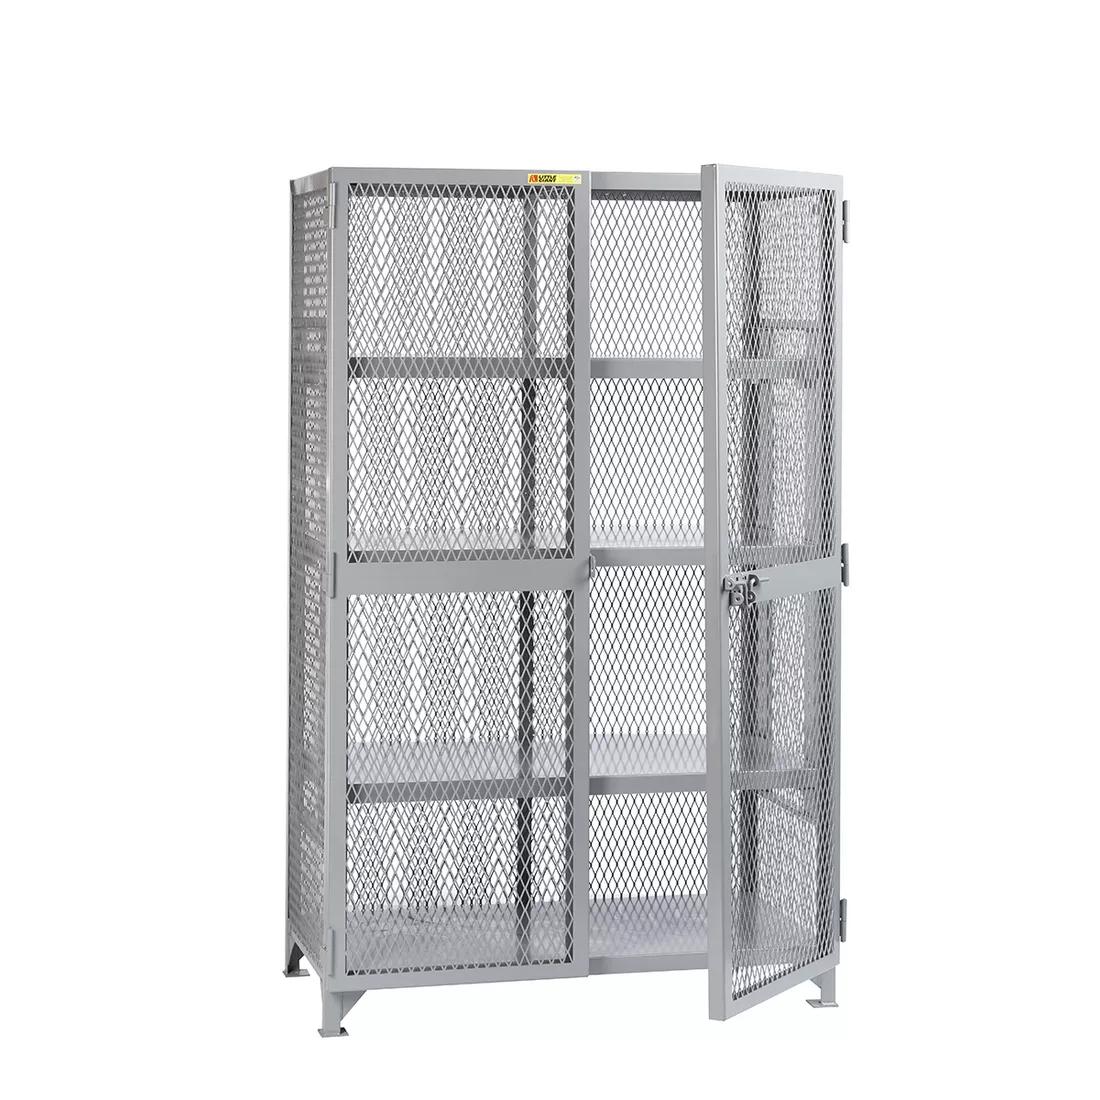 Stationary Security Cabinets | Reid Supply